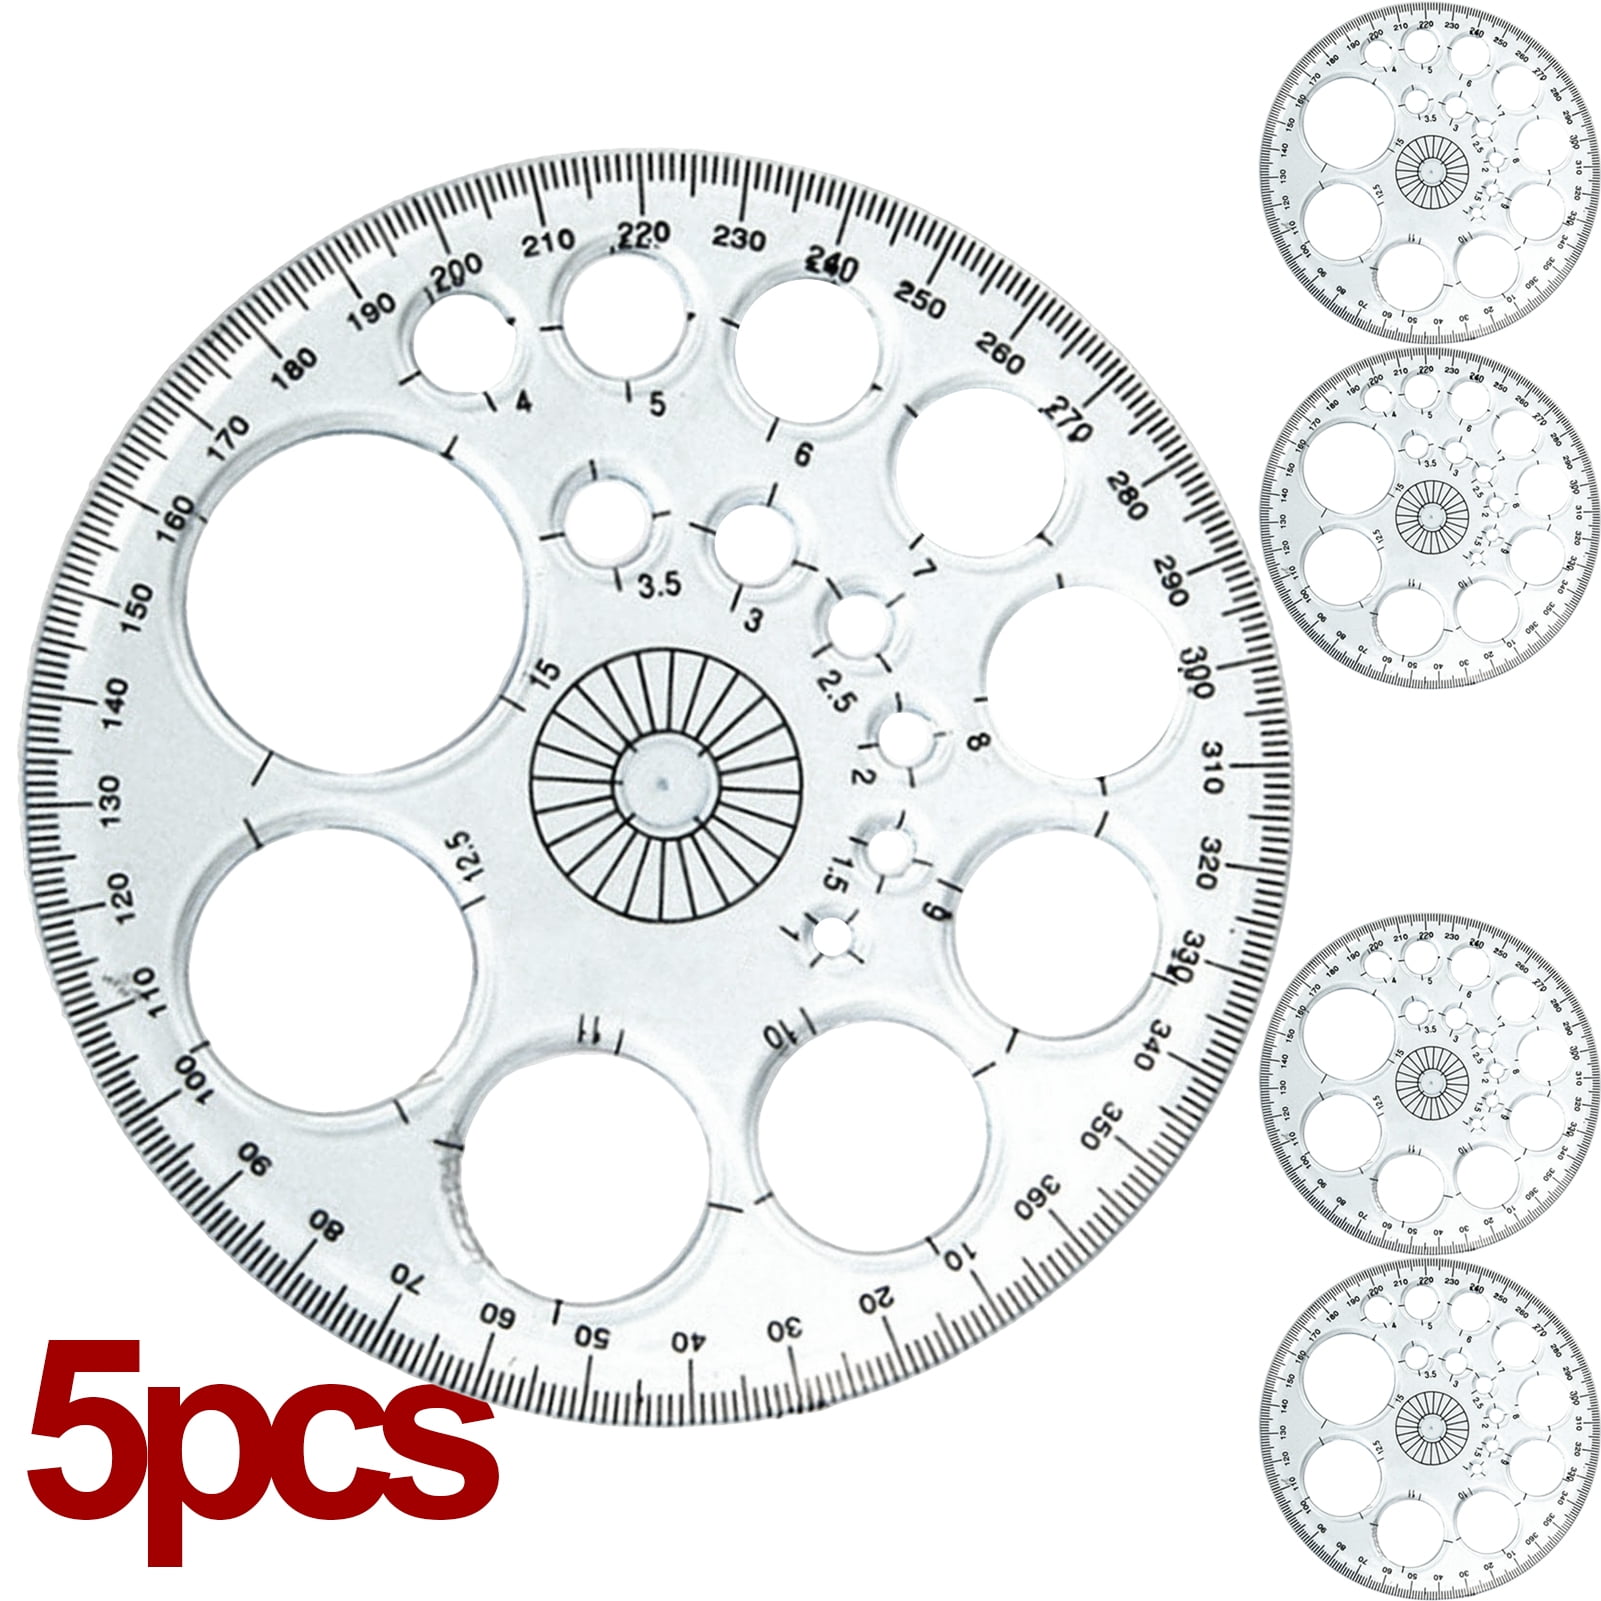 Round Protractor Measuring Ruler 360 Degree Protractor and Circle Maker Durable and Fashion 